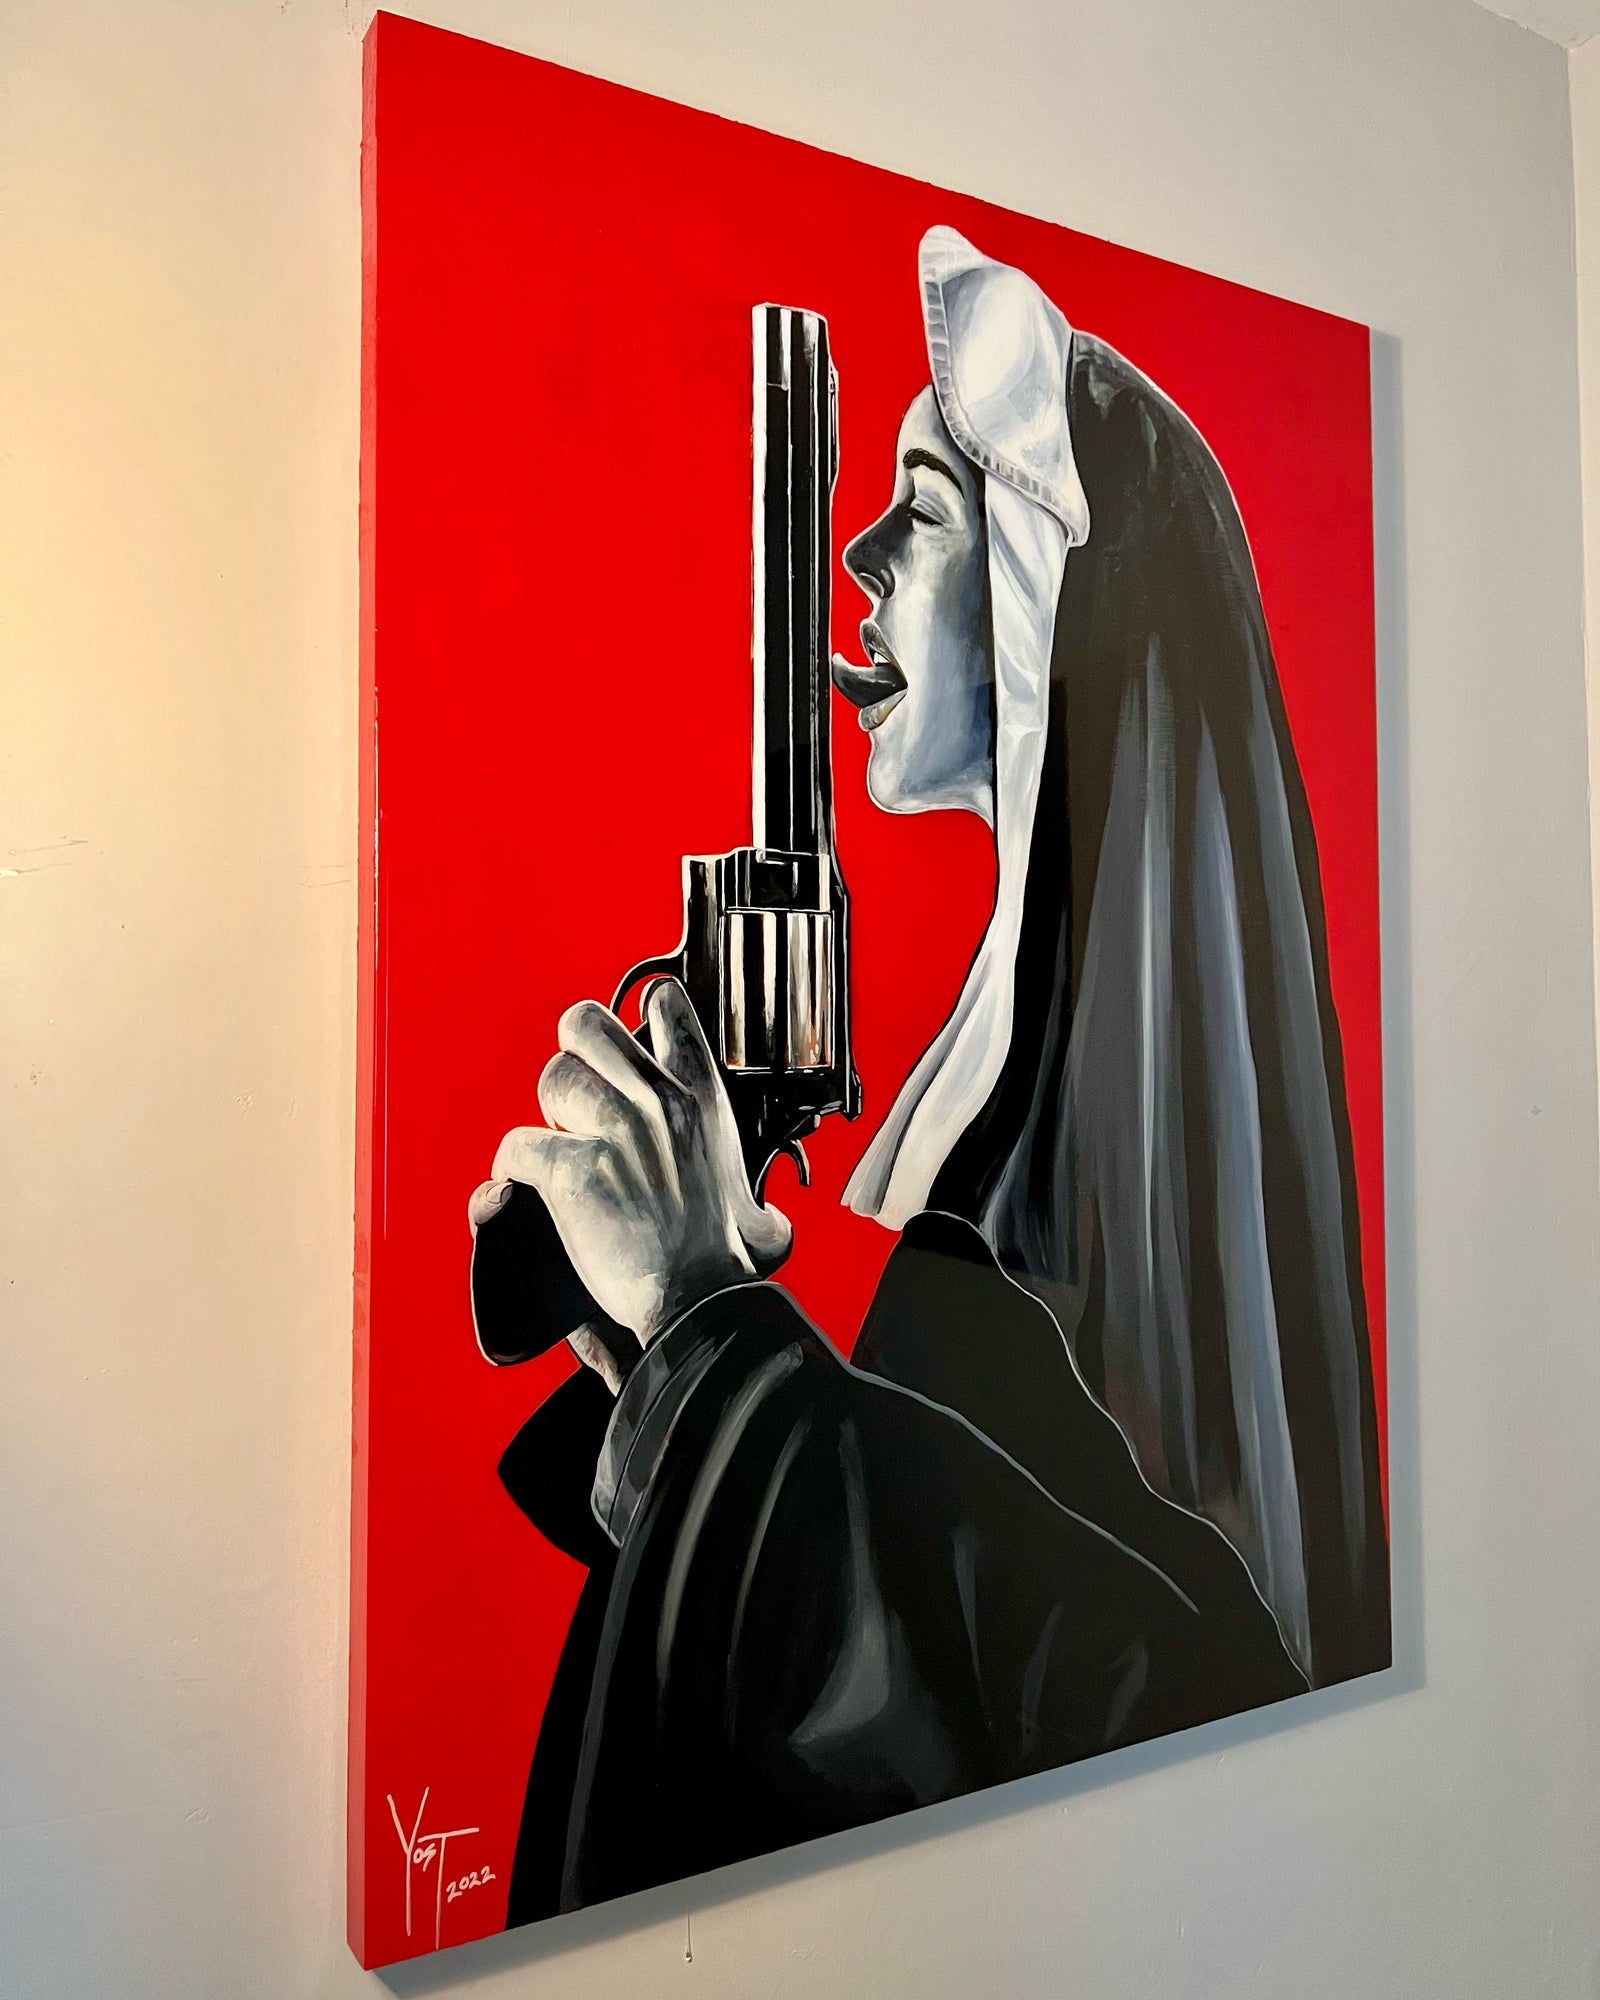 ‘For the sinners…Nun with a Gun’